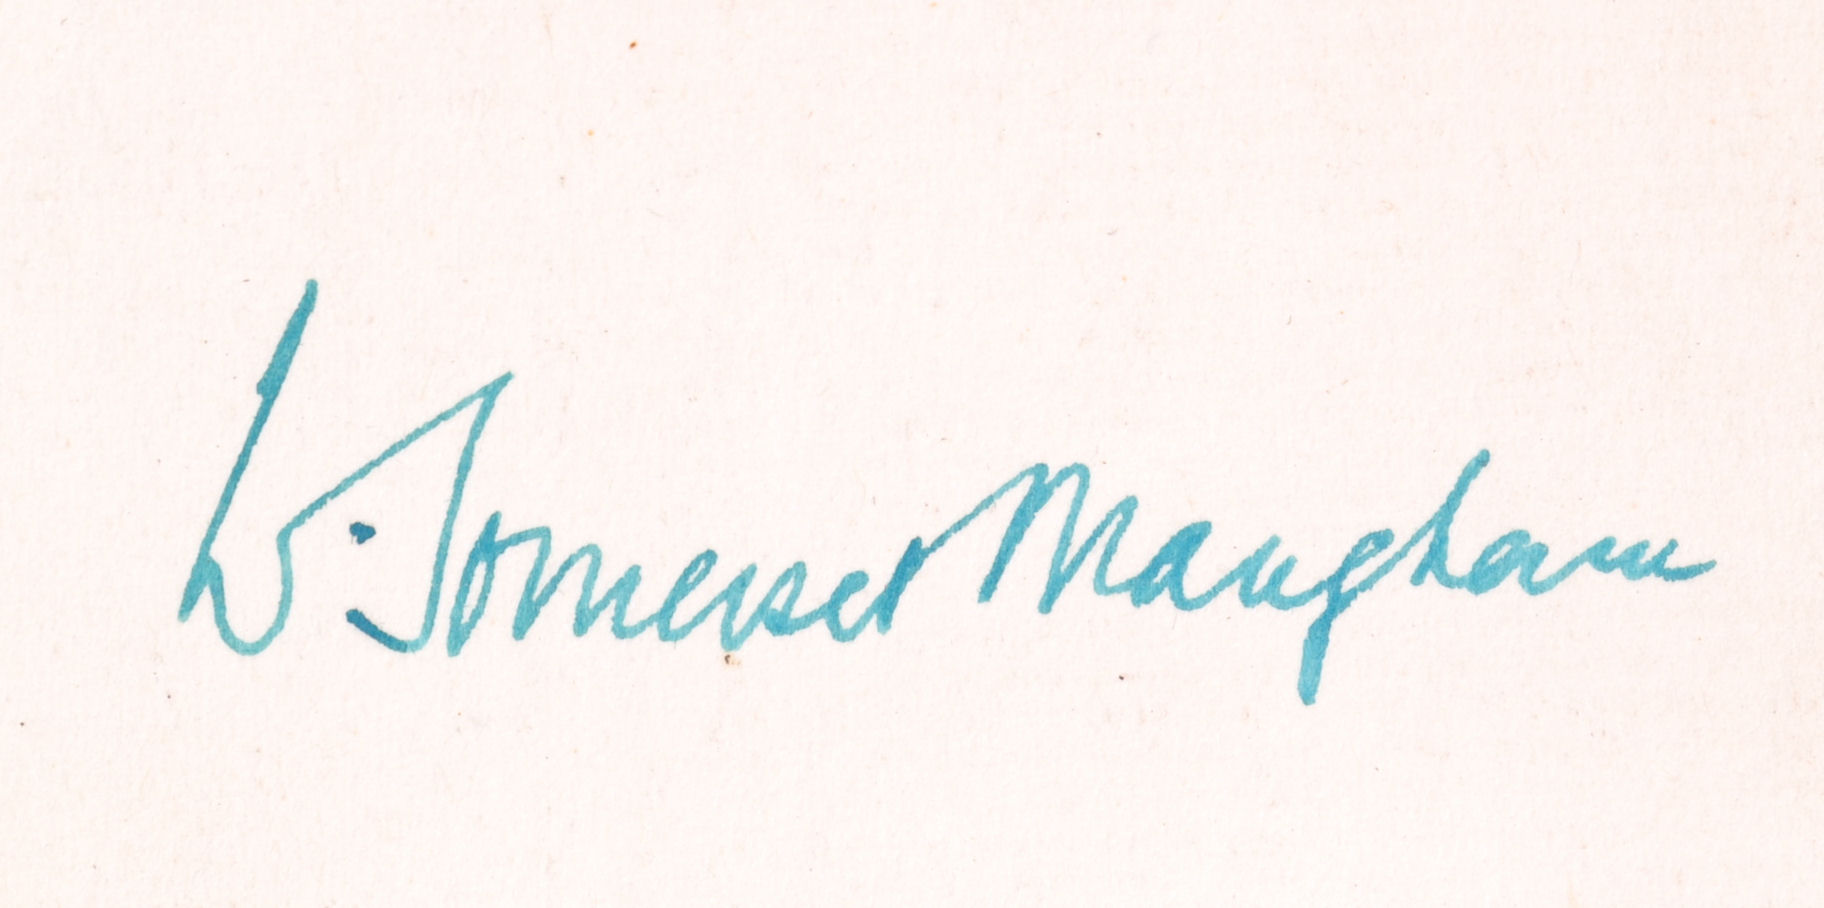 W. SOMERSET MAUGHAM - PLAYWRIGHT - RARE AUTOGRAPH - Image 2 of 4